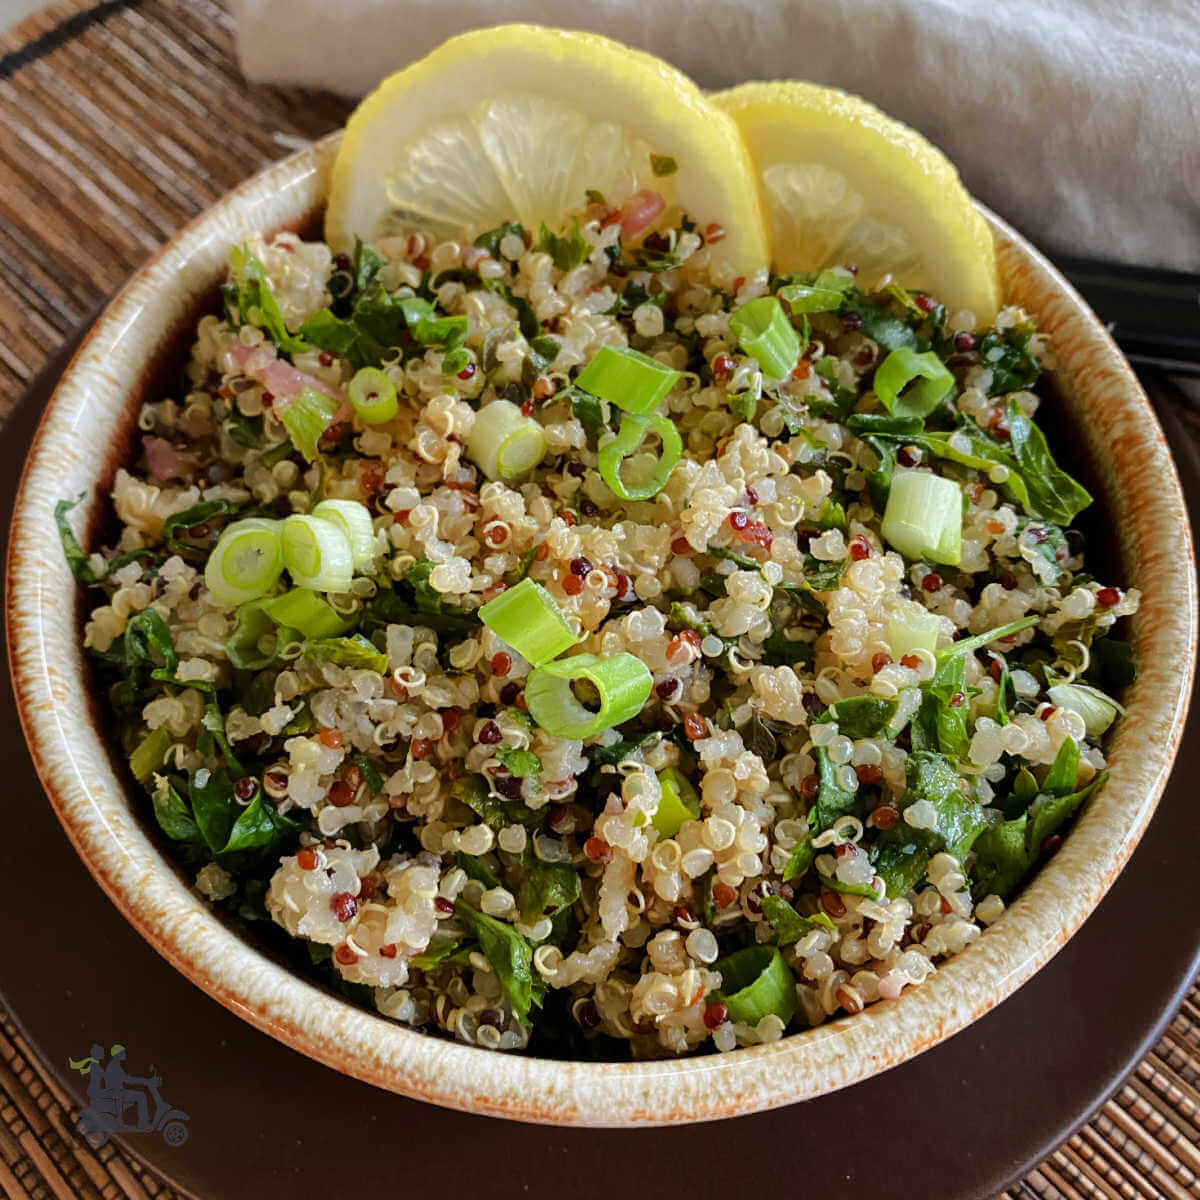 Herbed lemon quinoa with spinach in a brown pottery bowl.